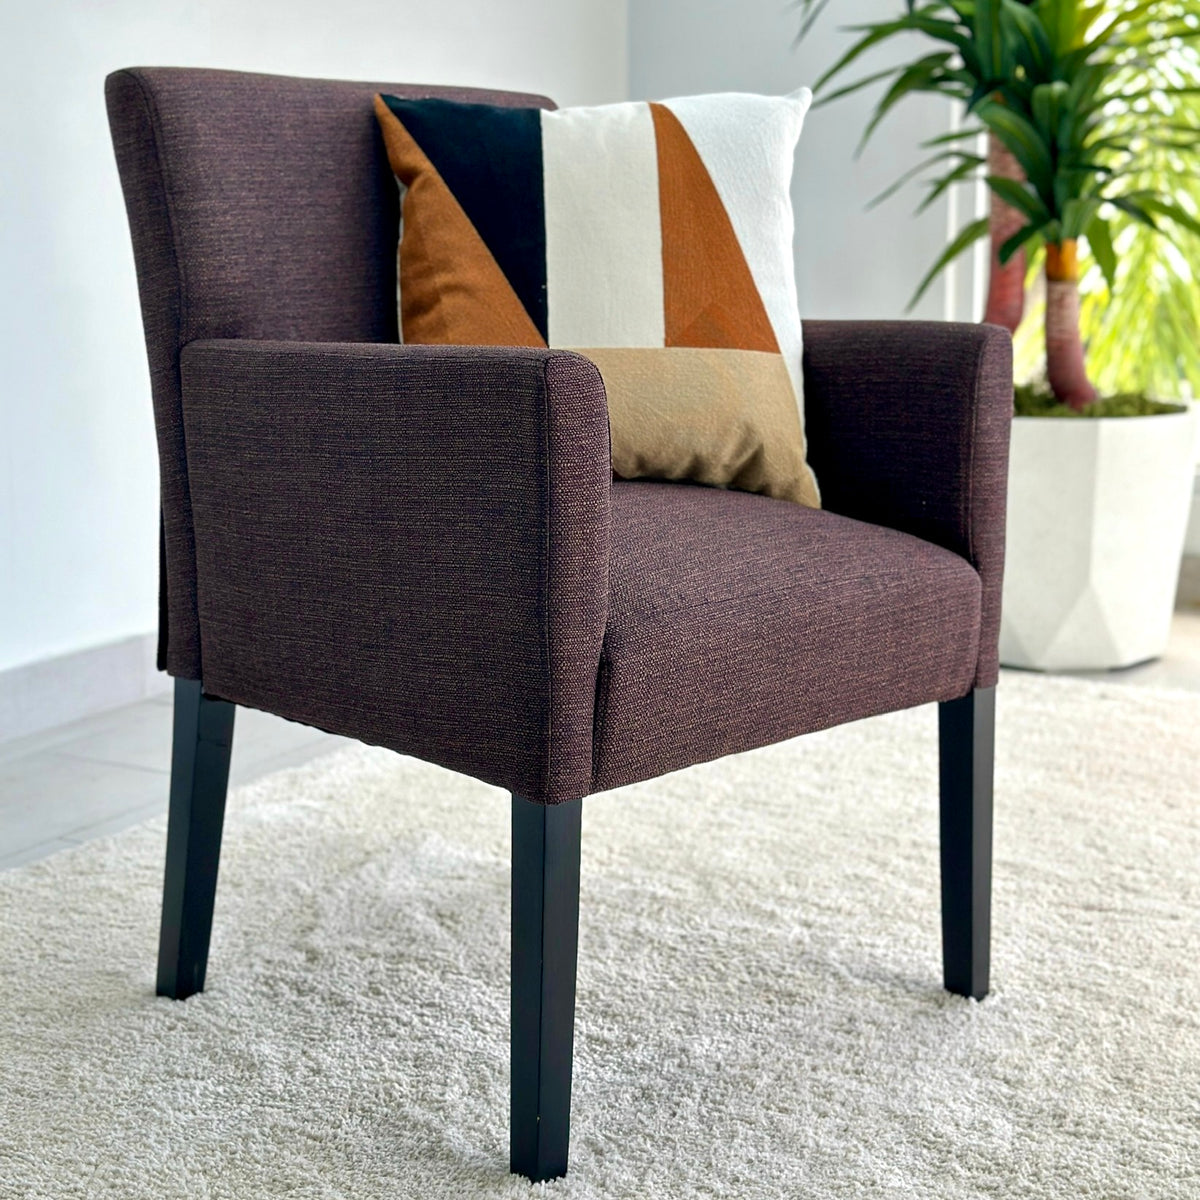 Rouse Accent Vivid Brown Fabric Chair